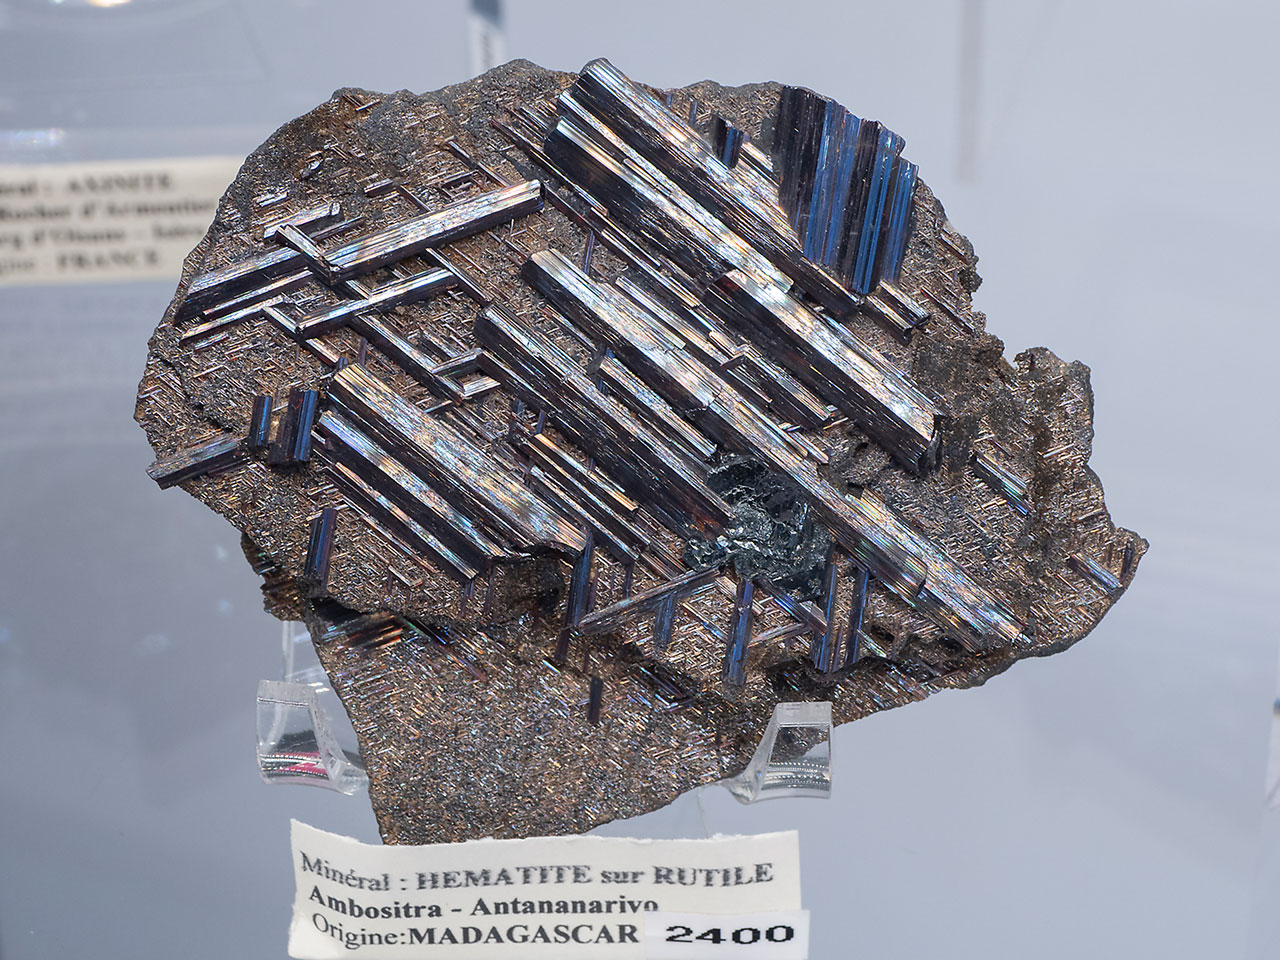 Oriented growths of rutile and hematite from Ambositra, Madagascar